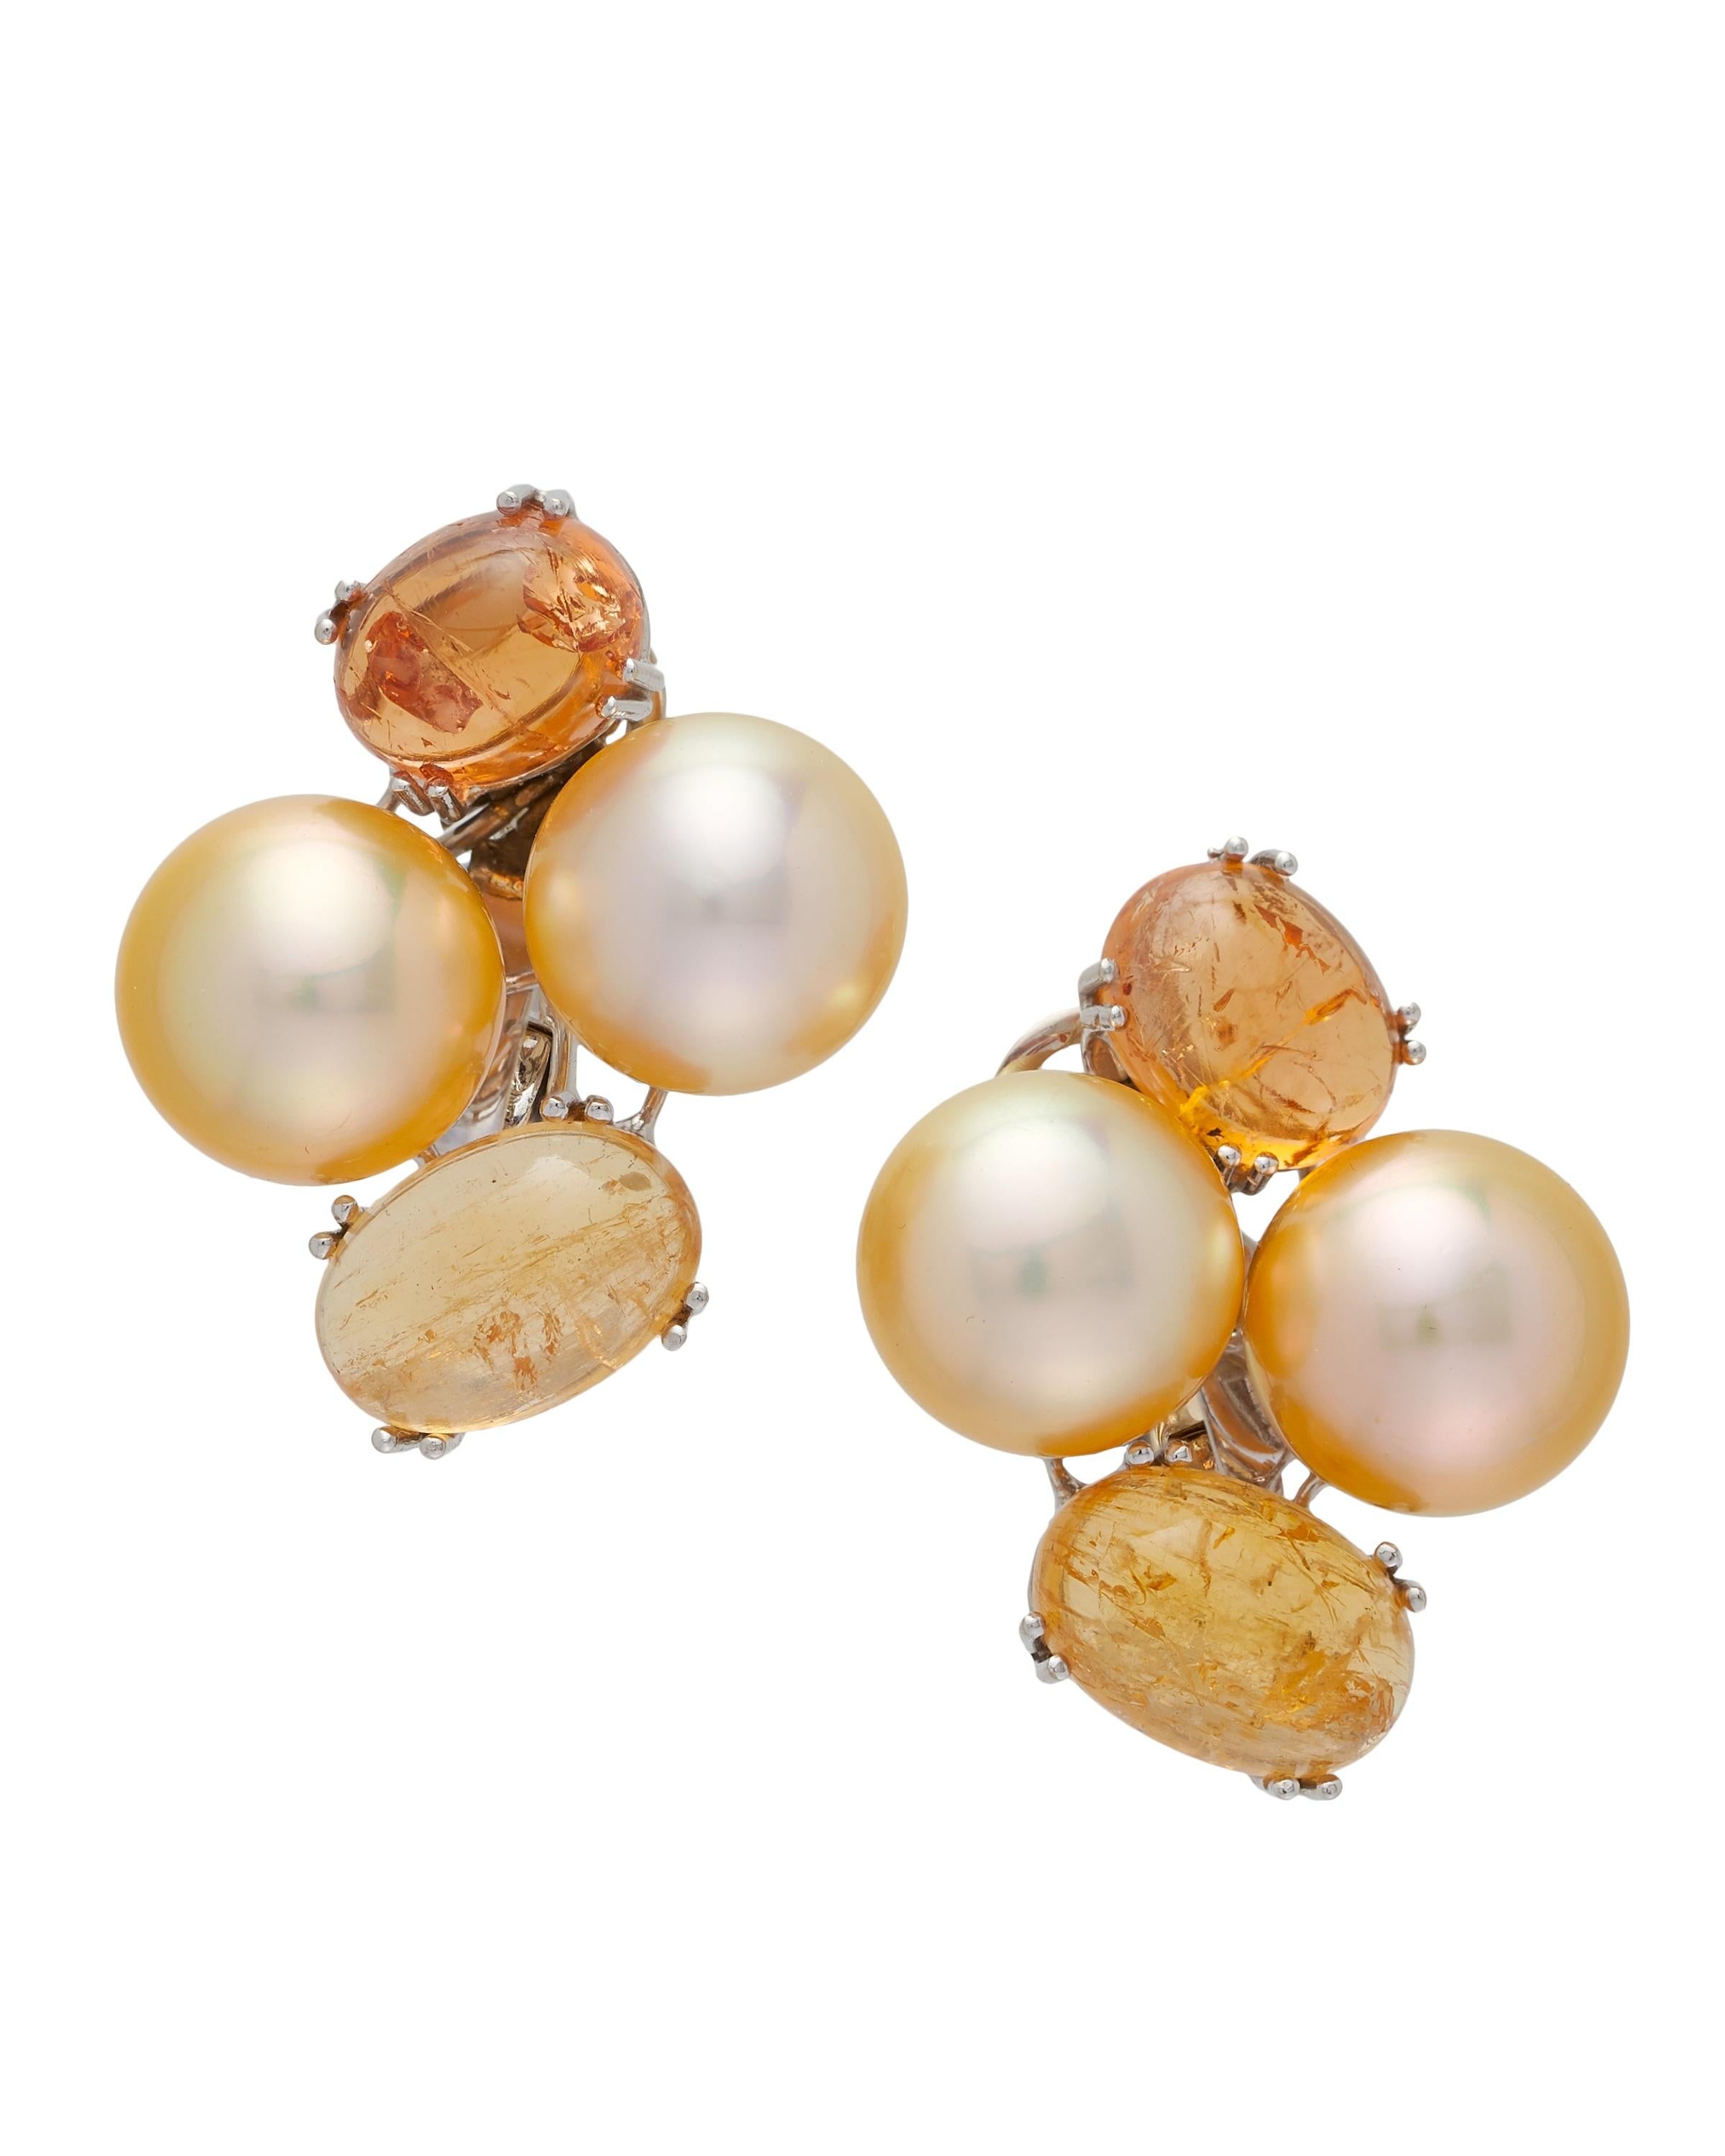 Margot McKinney 18 Karat Yellow Gold Earrings set with Golden South Sea Pearls 42.6ct being 11.6x11.9mm and oval cabochon rutilated Yellow Topaz and Yellow Sapphire weighing in total 20.60ct.  Clip suits both pierced and non-pierced ears.
